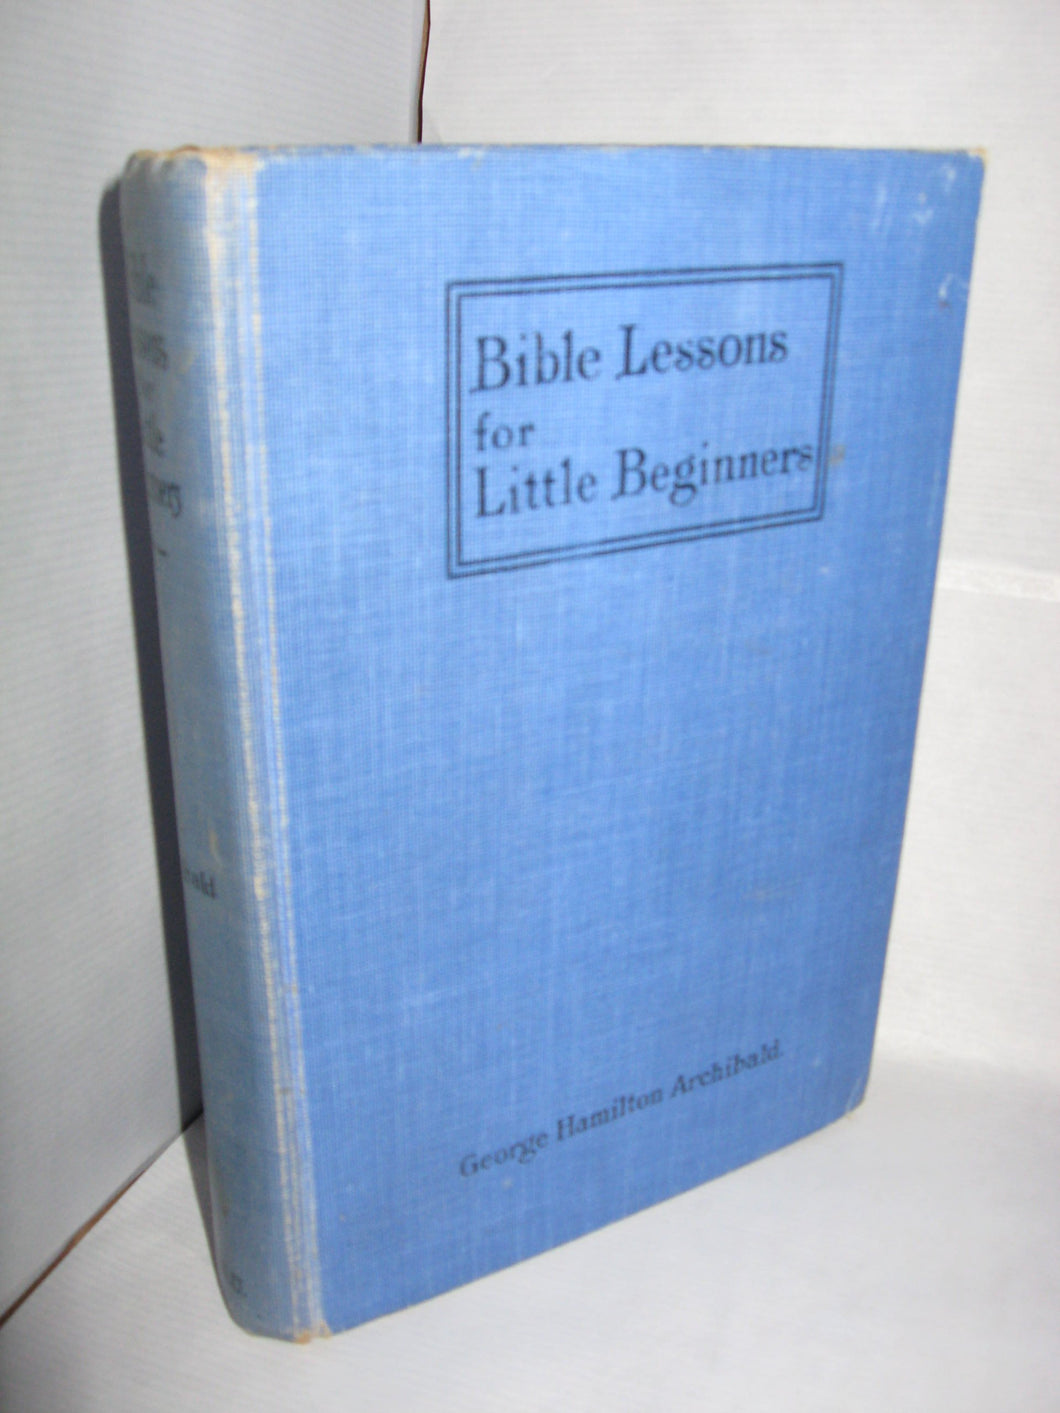 Bible Lessons for Little Beginners [Hardcover] George Hamilton Archibald